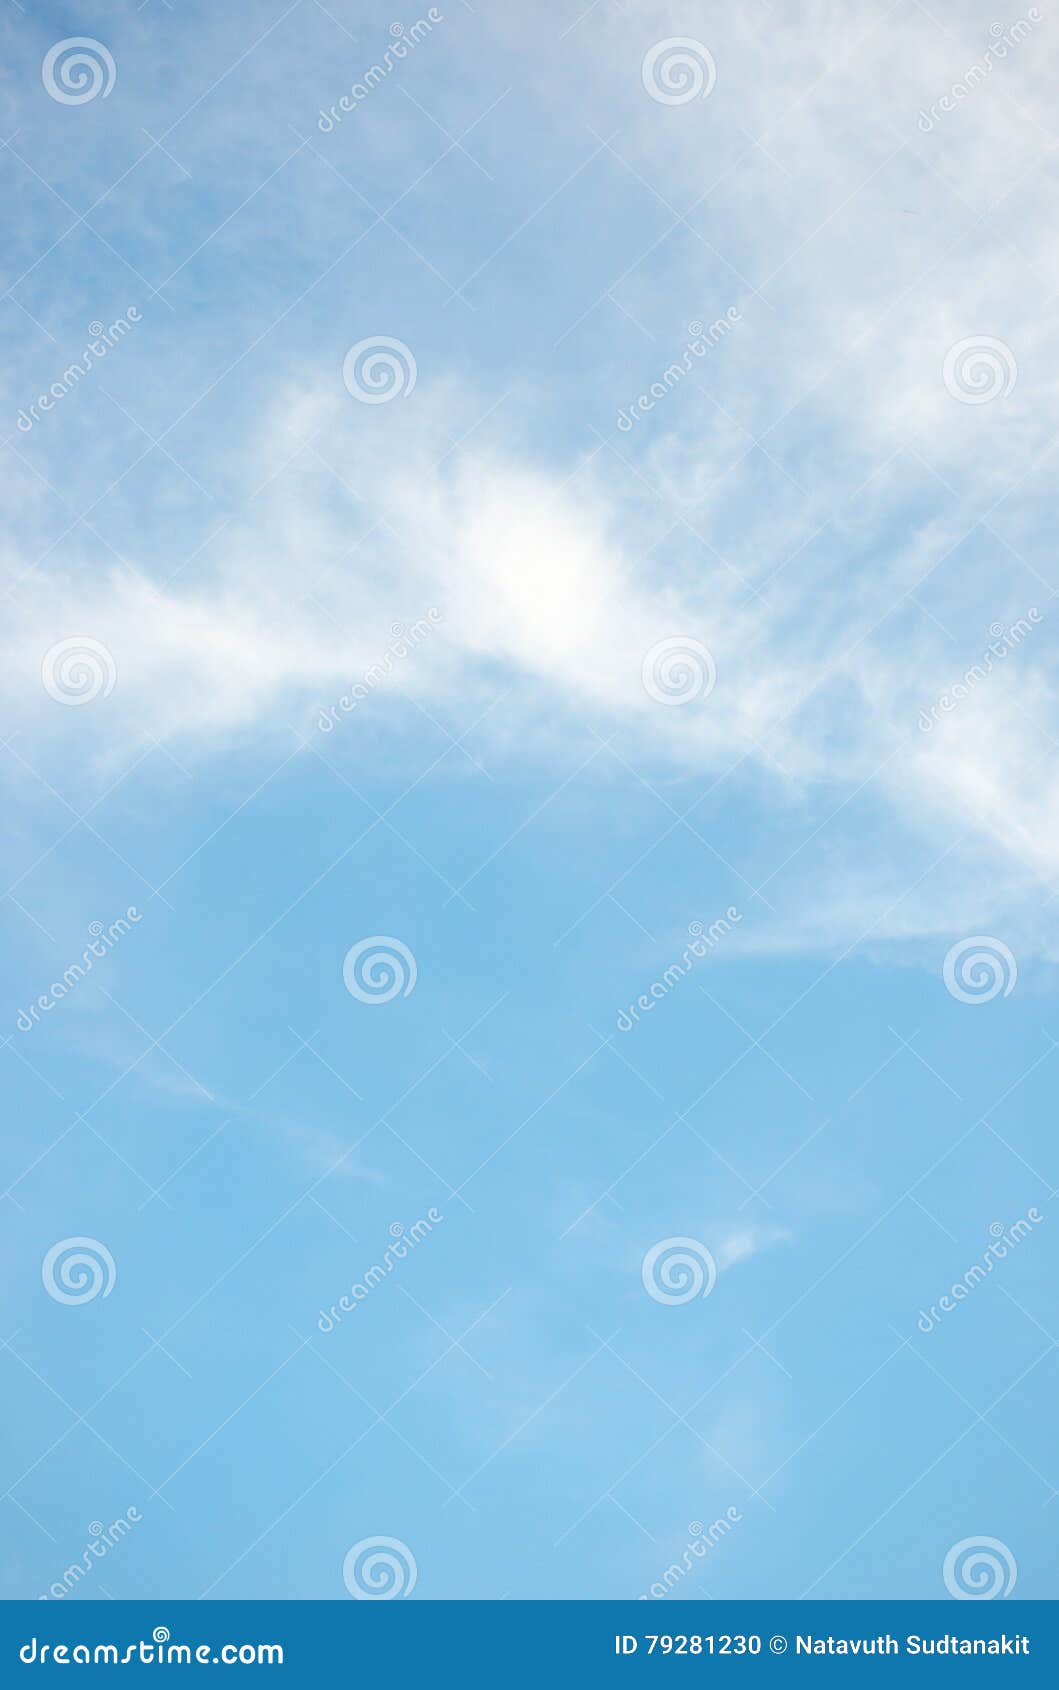 Blue sky with cloud stock photo. Image of color, cumulus - 79281230